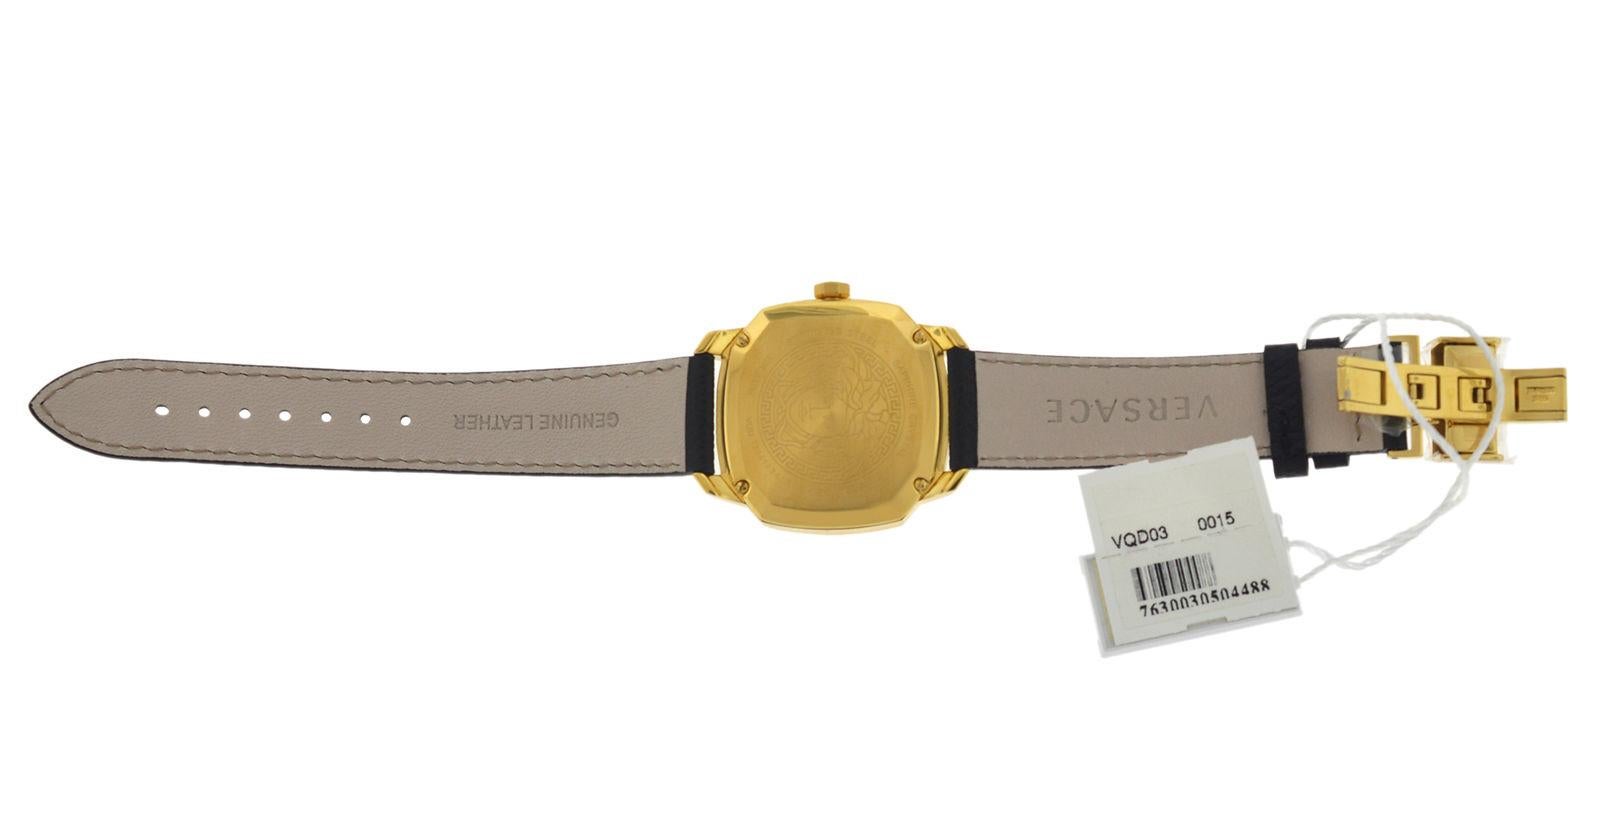 Brand	Versace
Model	Dylos VQD03 0015
Gender	Ladies
Condition	New
Movement	Swiss Quartz
Case Material	Gold IP over Stainless Steel 
Bracelet / Strap Material	
Leather

Clasp / Buckle Material	
Stainless Steel

Clasp Type	Butterfly deployment
Bracelet